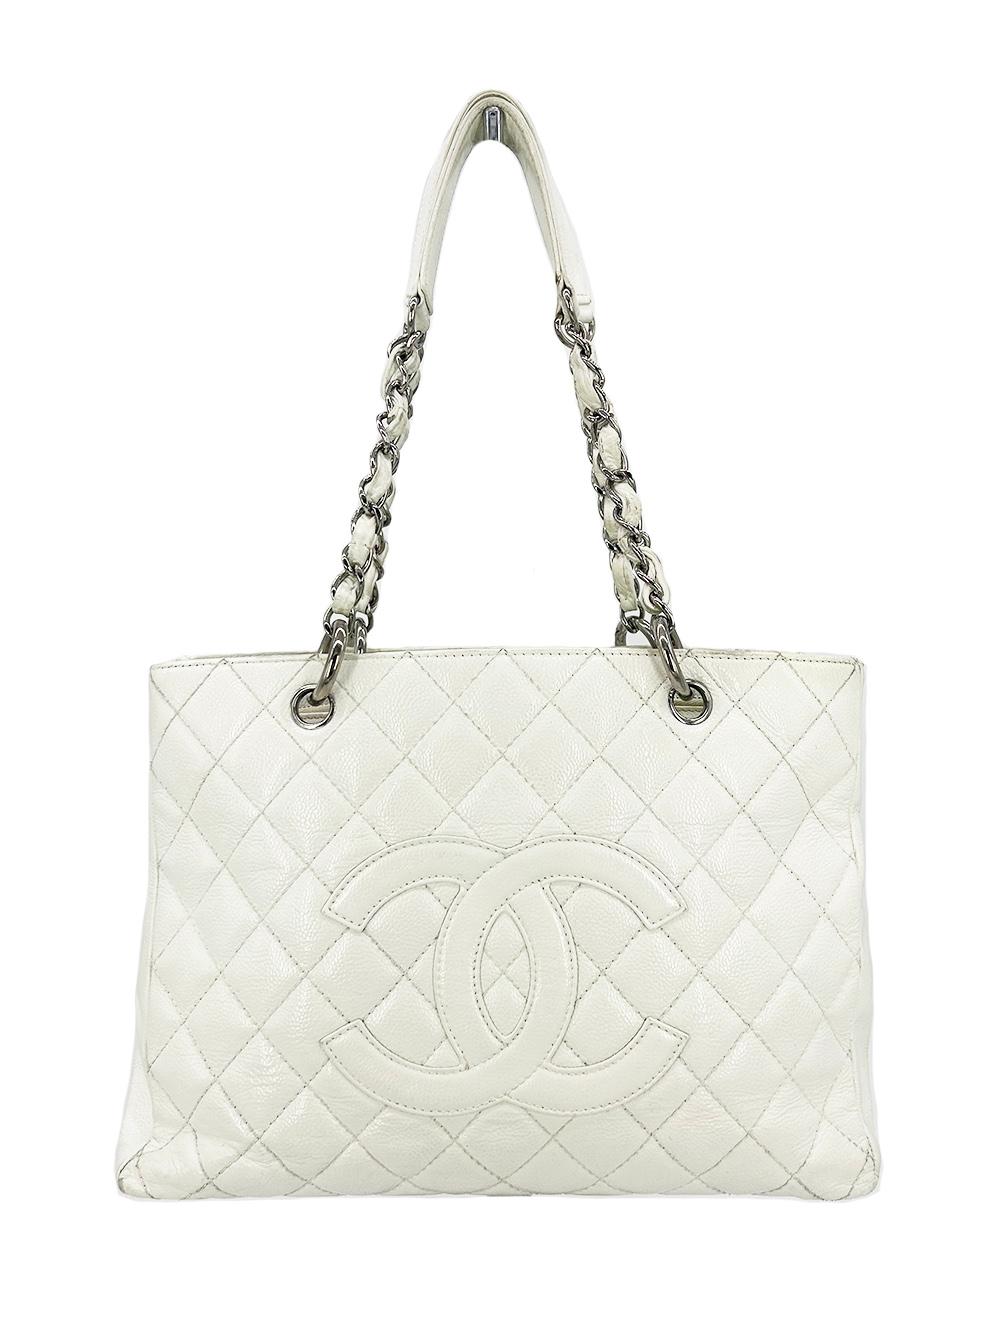 Chanel Quilted White Caviar Grand Shopper Tote In Fair Condition For Sale In Philadelphia, PA